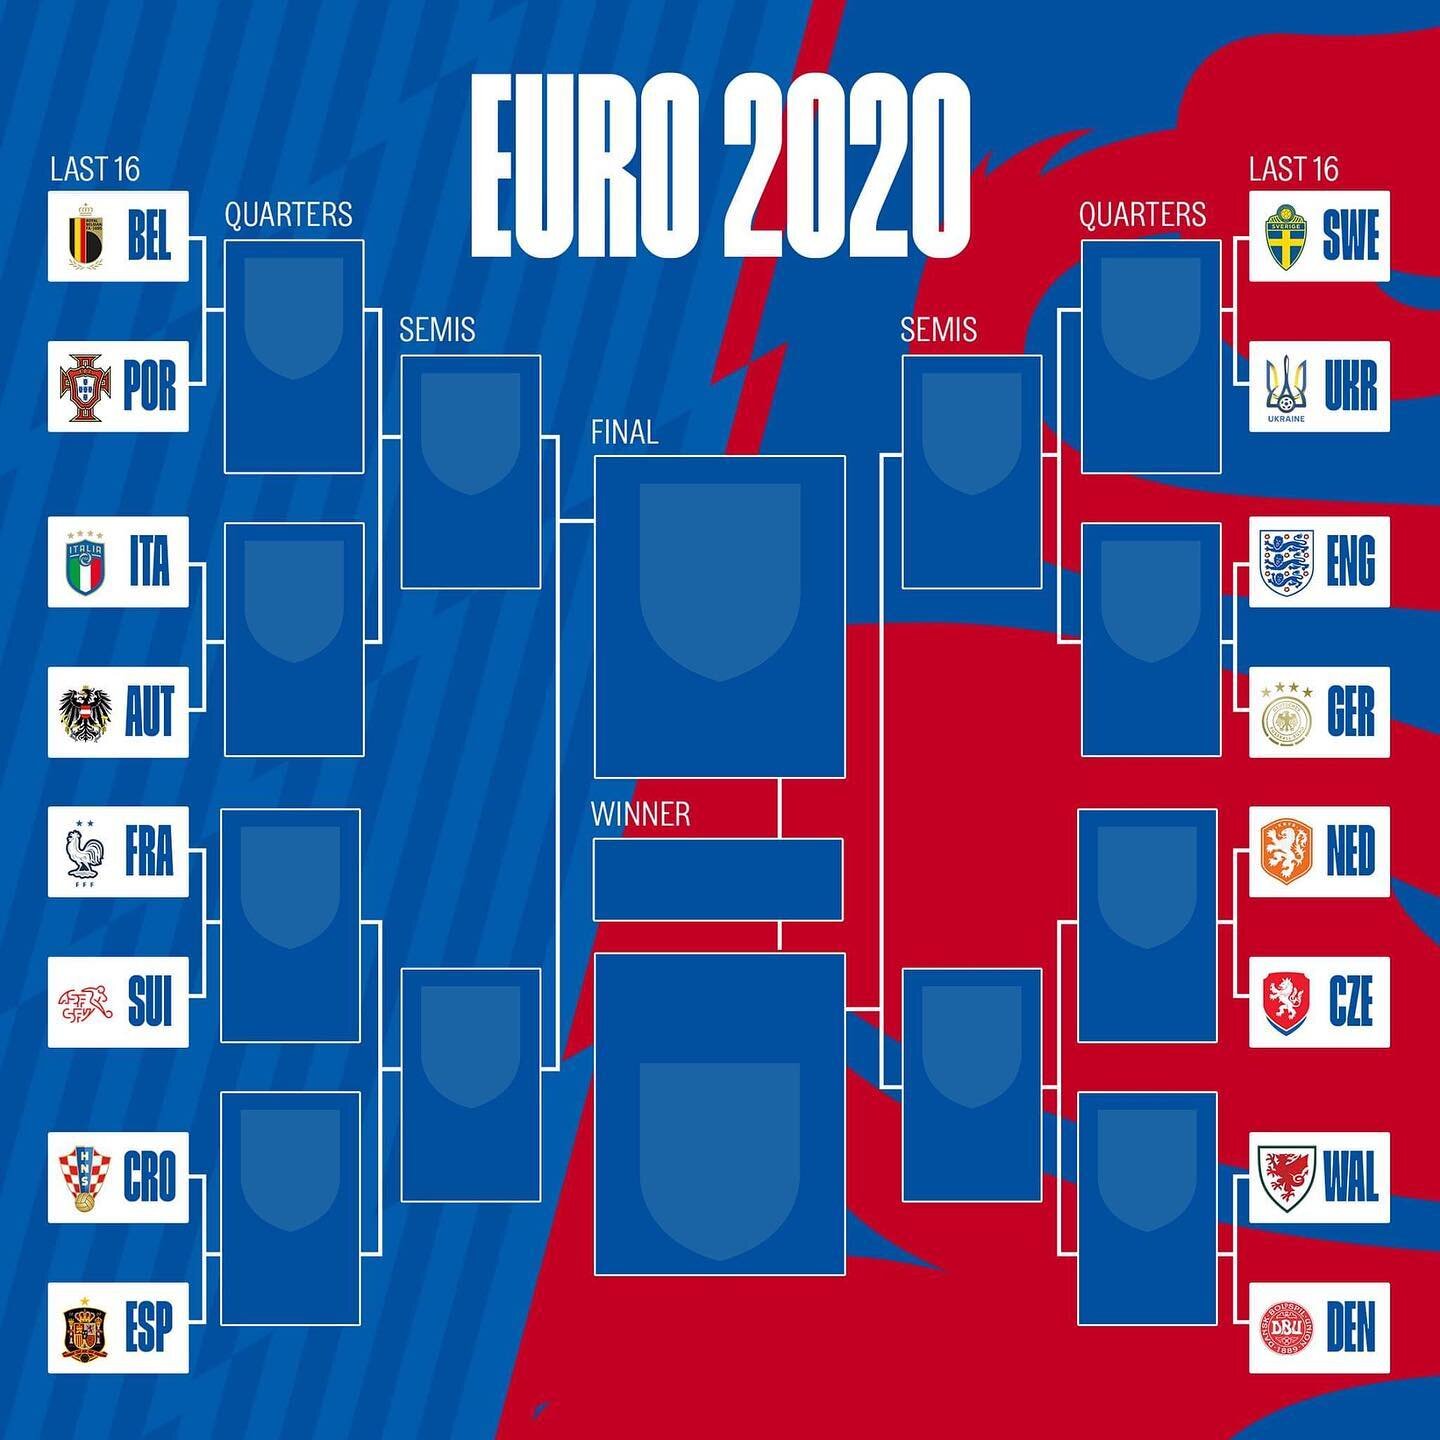 🏟Pick the teams and correct score in the final to win a free camp! 

⚽️Save this picture and send us your final prediction and tag 3 friends to win $200 off a SC Pro soccer camp!!! 🦁✨🏕
.
.
.
.
.
.
.
.
.
.
.
#uefachampionsleague #euro2020 
#euro202